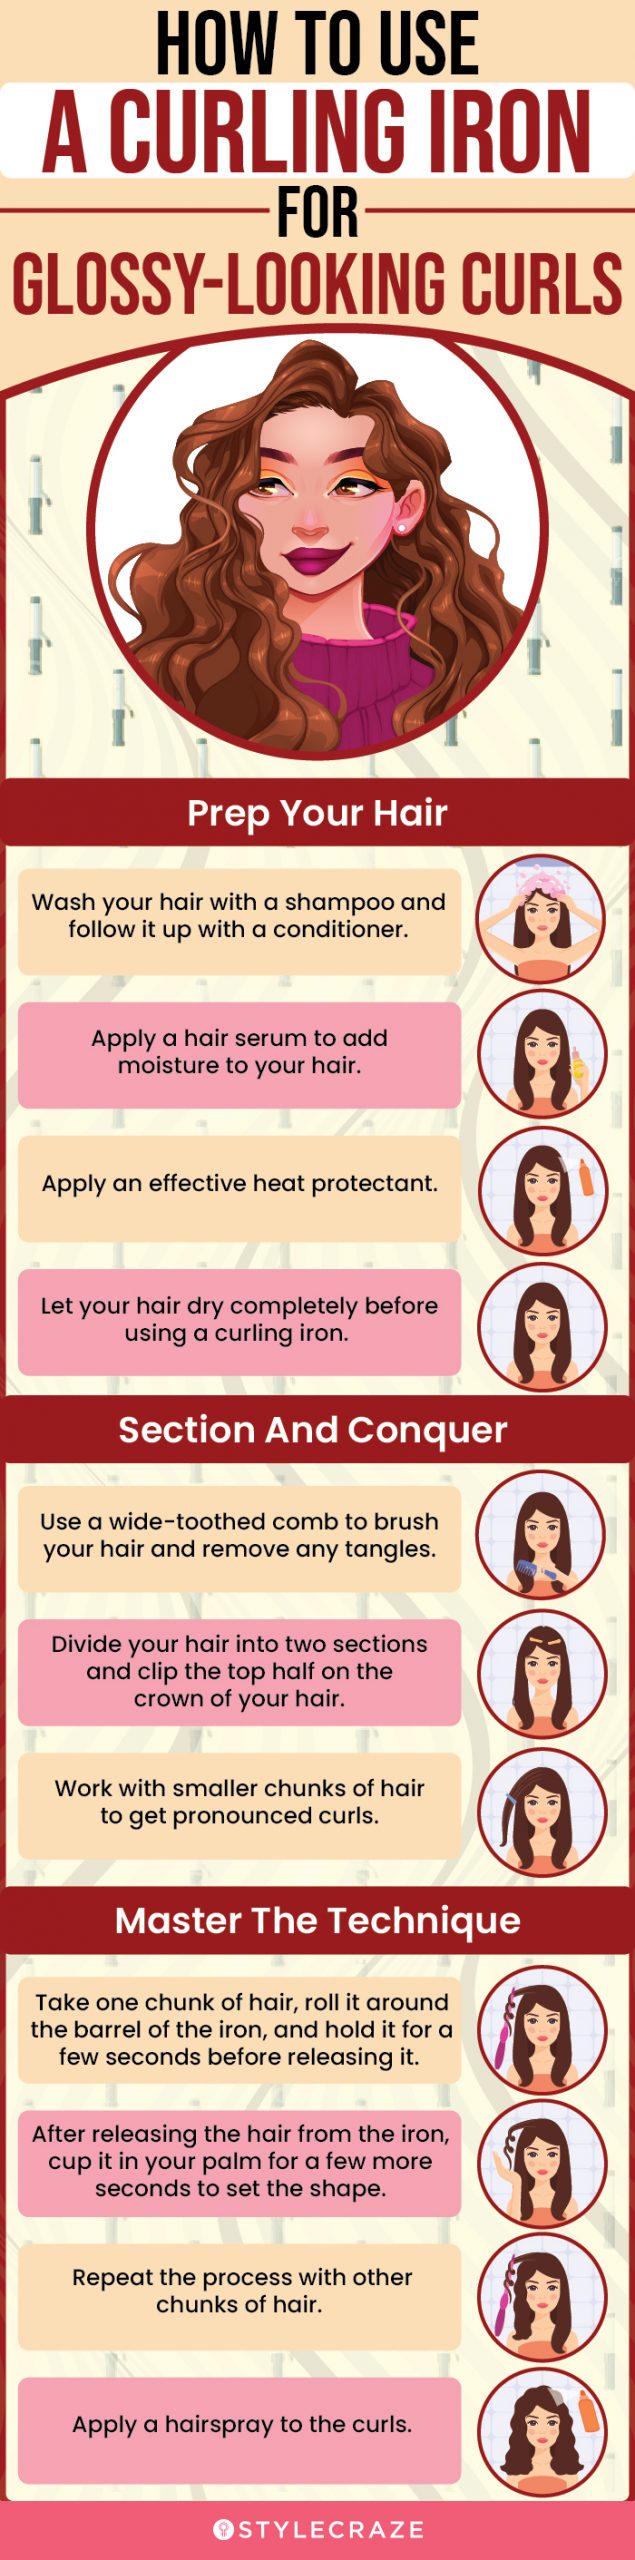 How To Use A Curling Iron For Glossy-Looking Curls (infographic)